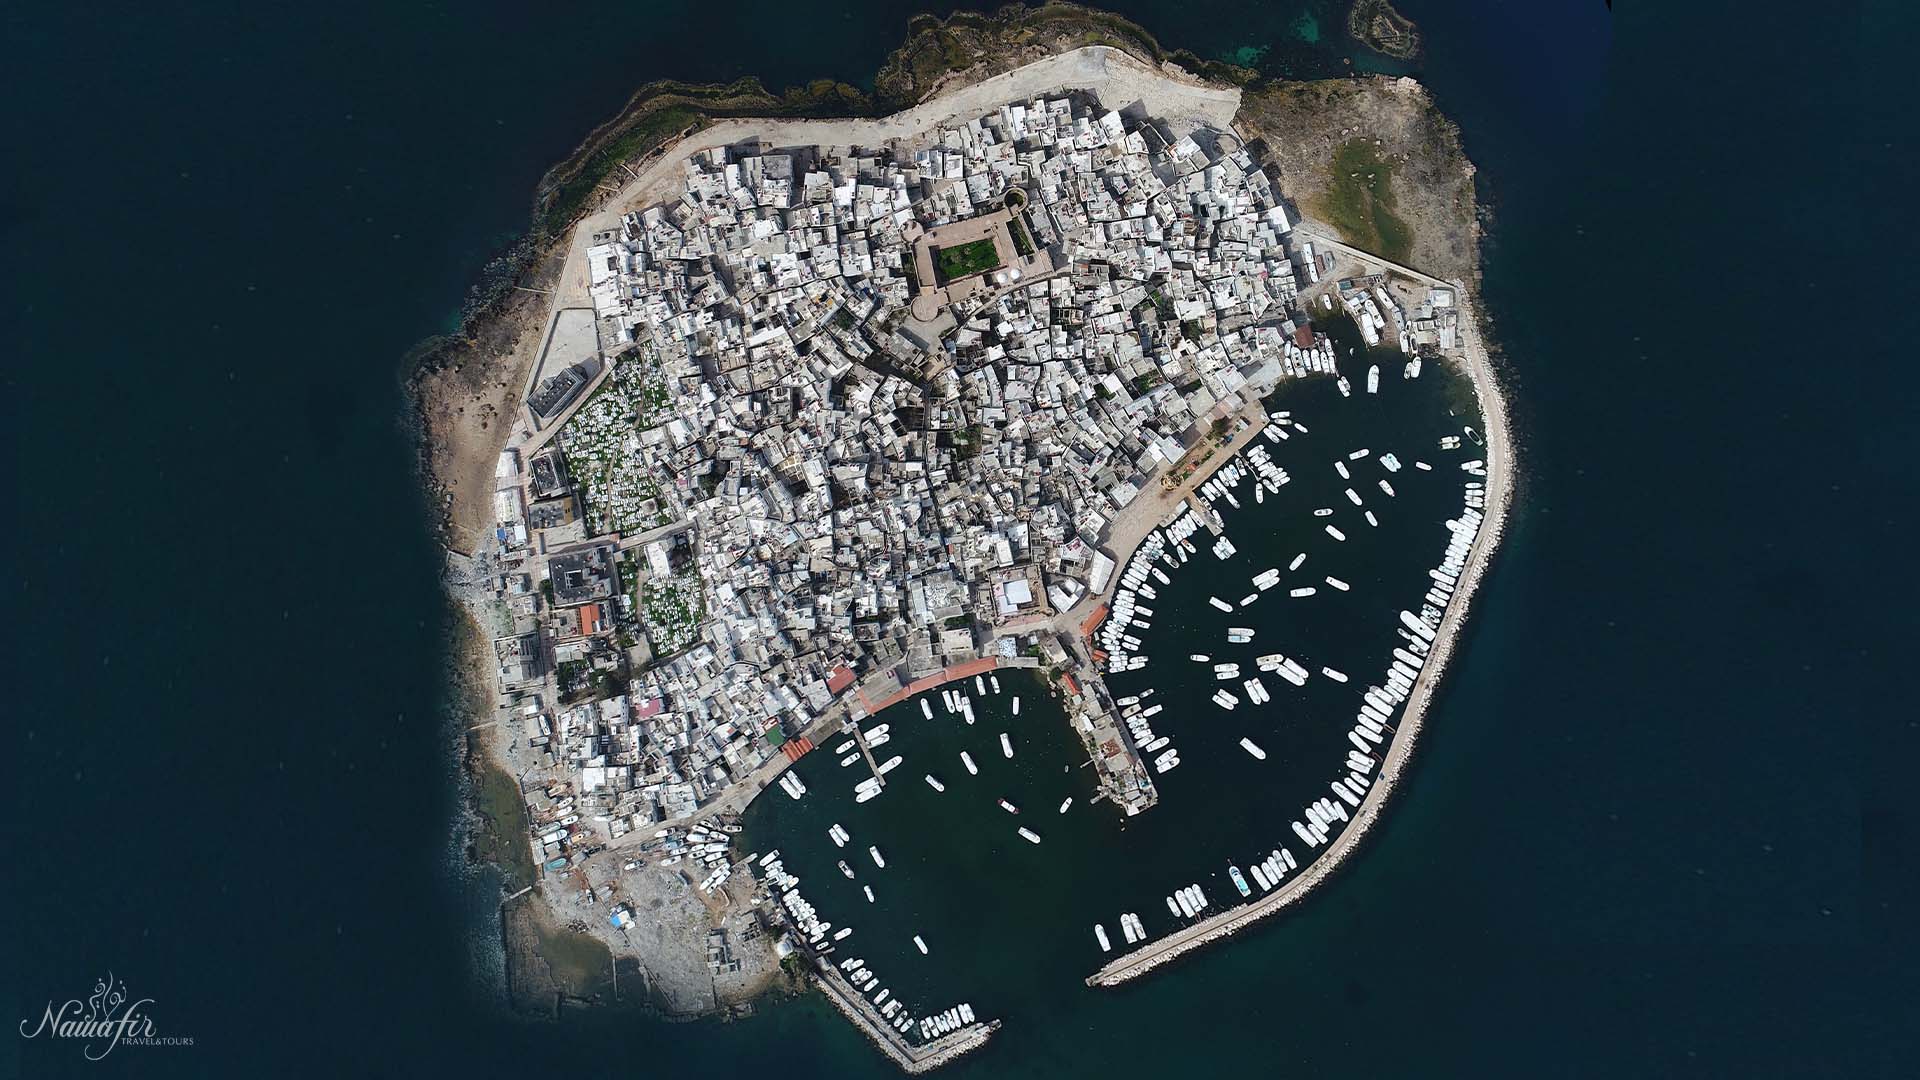 From an aerial vantage point, a photograph captures the enchanting Arwad Island, the only inhabited island in Syria, gracefully positioned off the coast of Tartous.